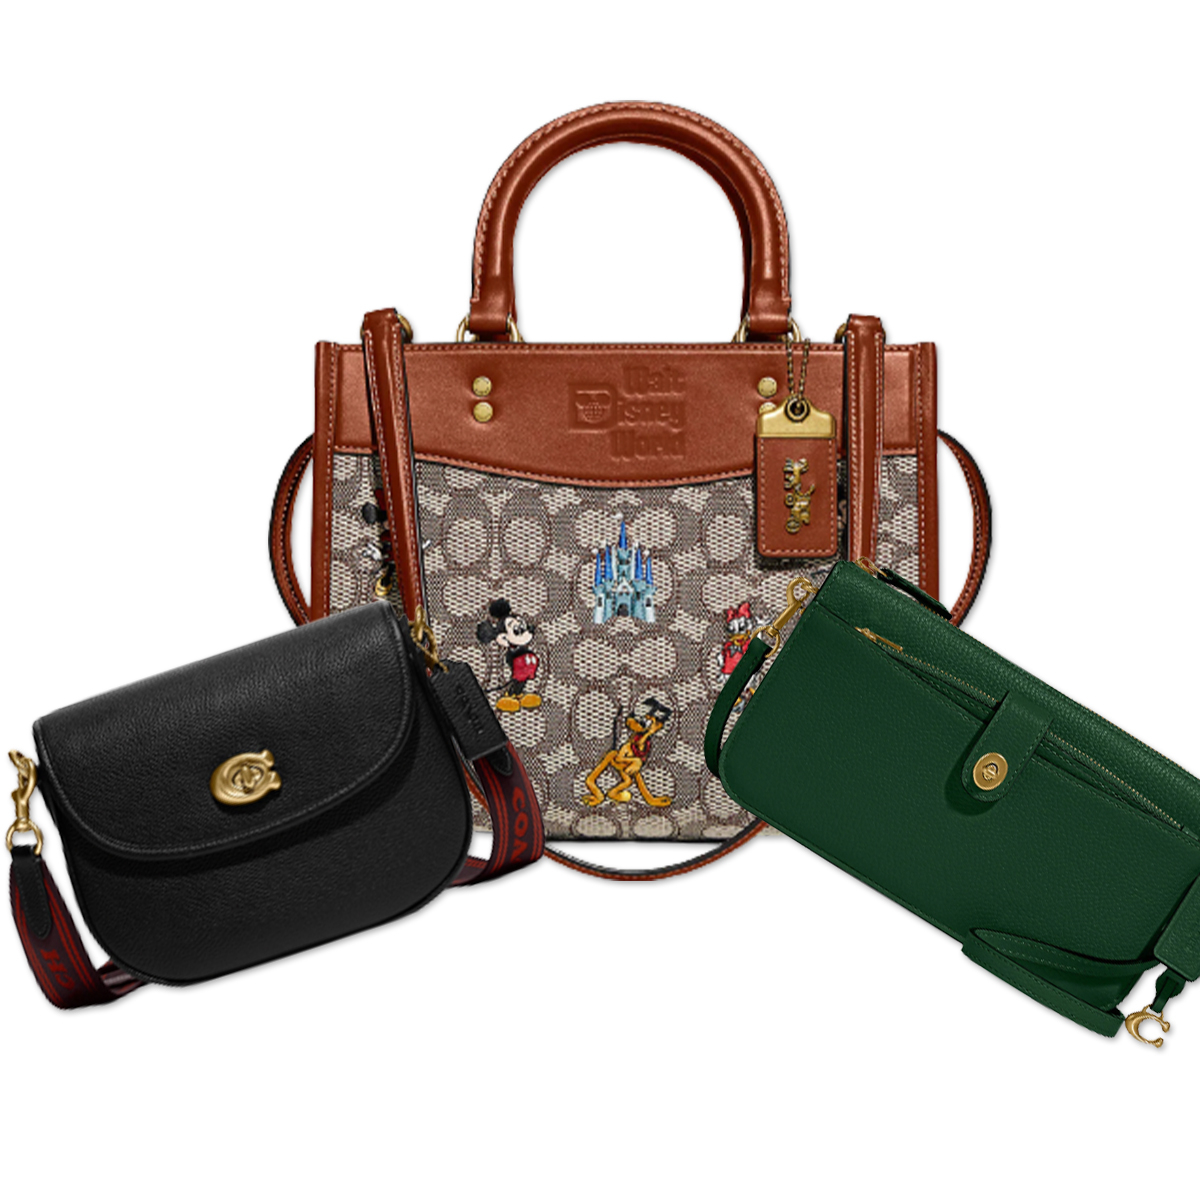 Coach Labor Day Sale Take 25 Off Bags & More That Never Go on Sale